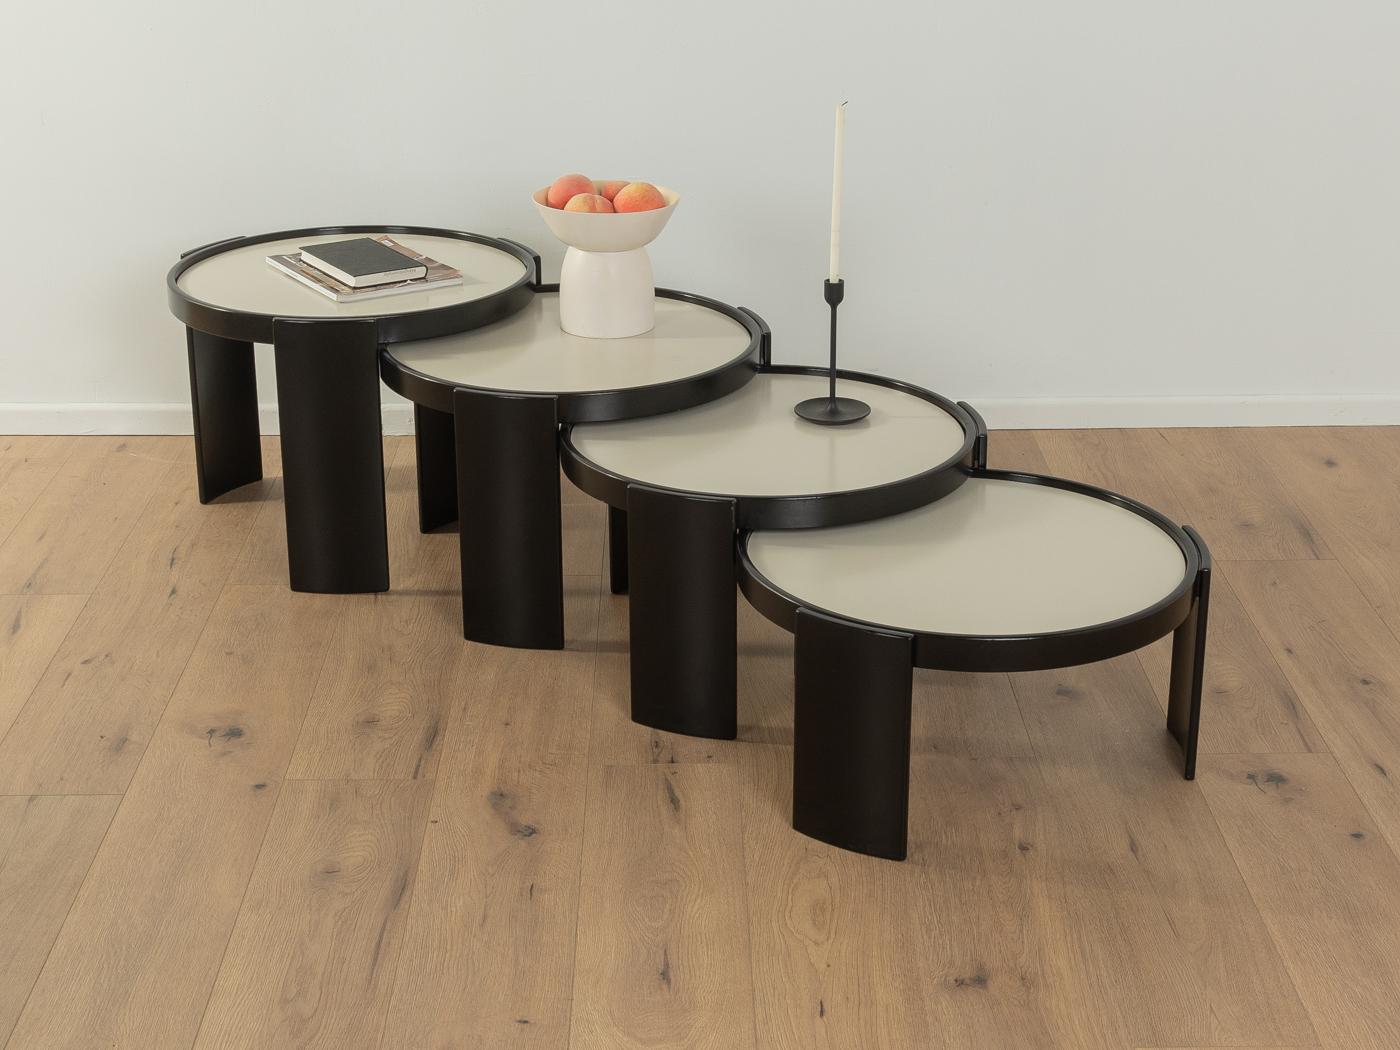 Exclusive nesting tables, model 783, by Gianfranco Frattini for Cassina from the 1960s. High-quality black lacquered wooden frame with four reversible table tops in black and off white. The nesting tables can be arranged in several different